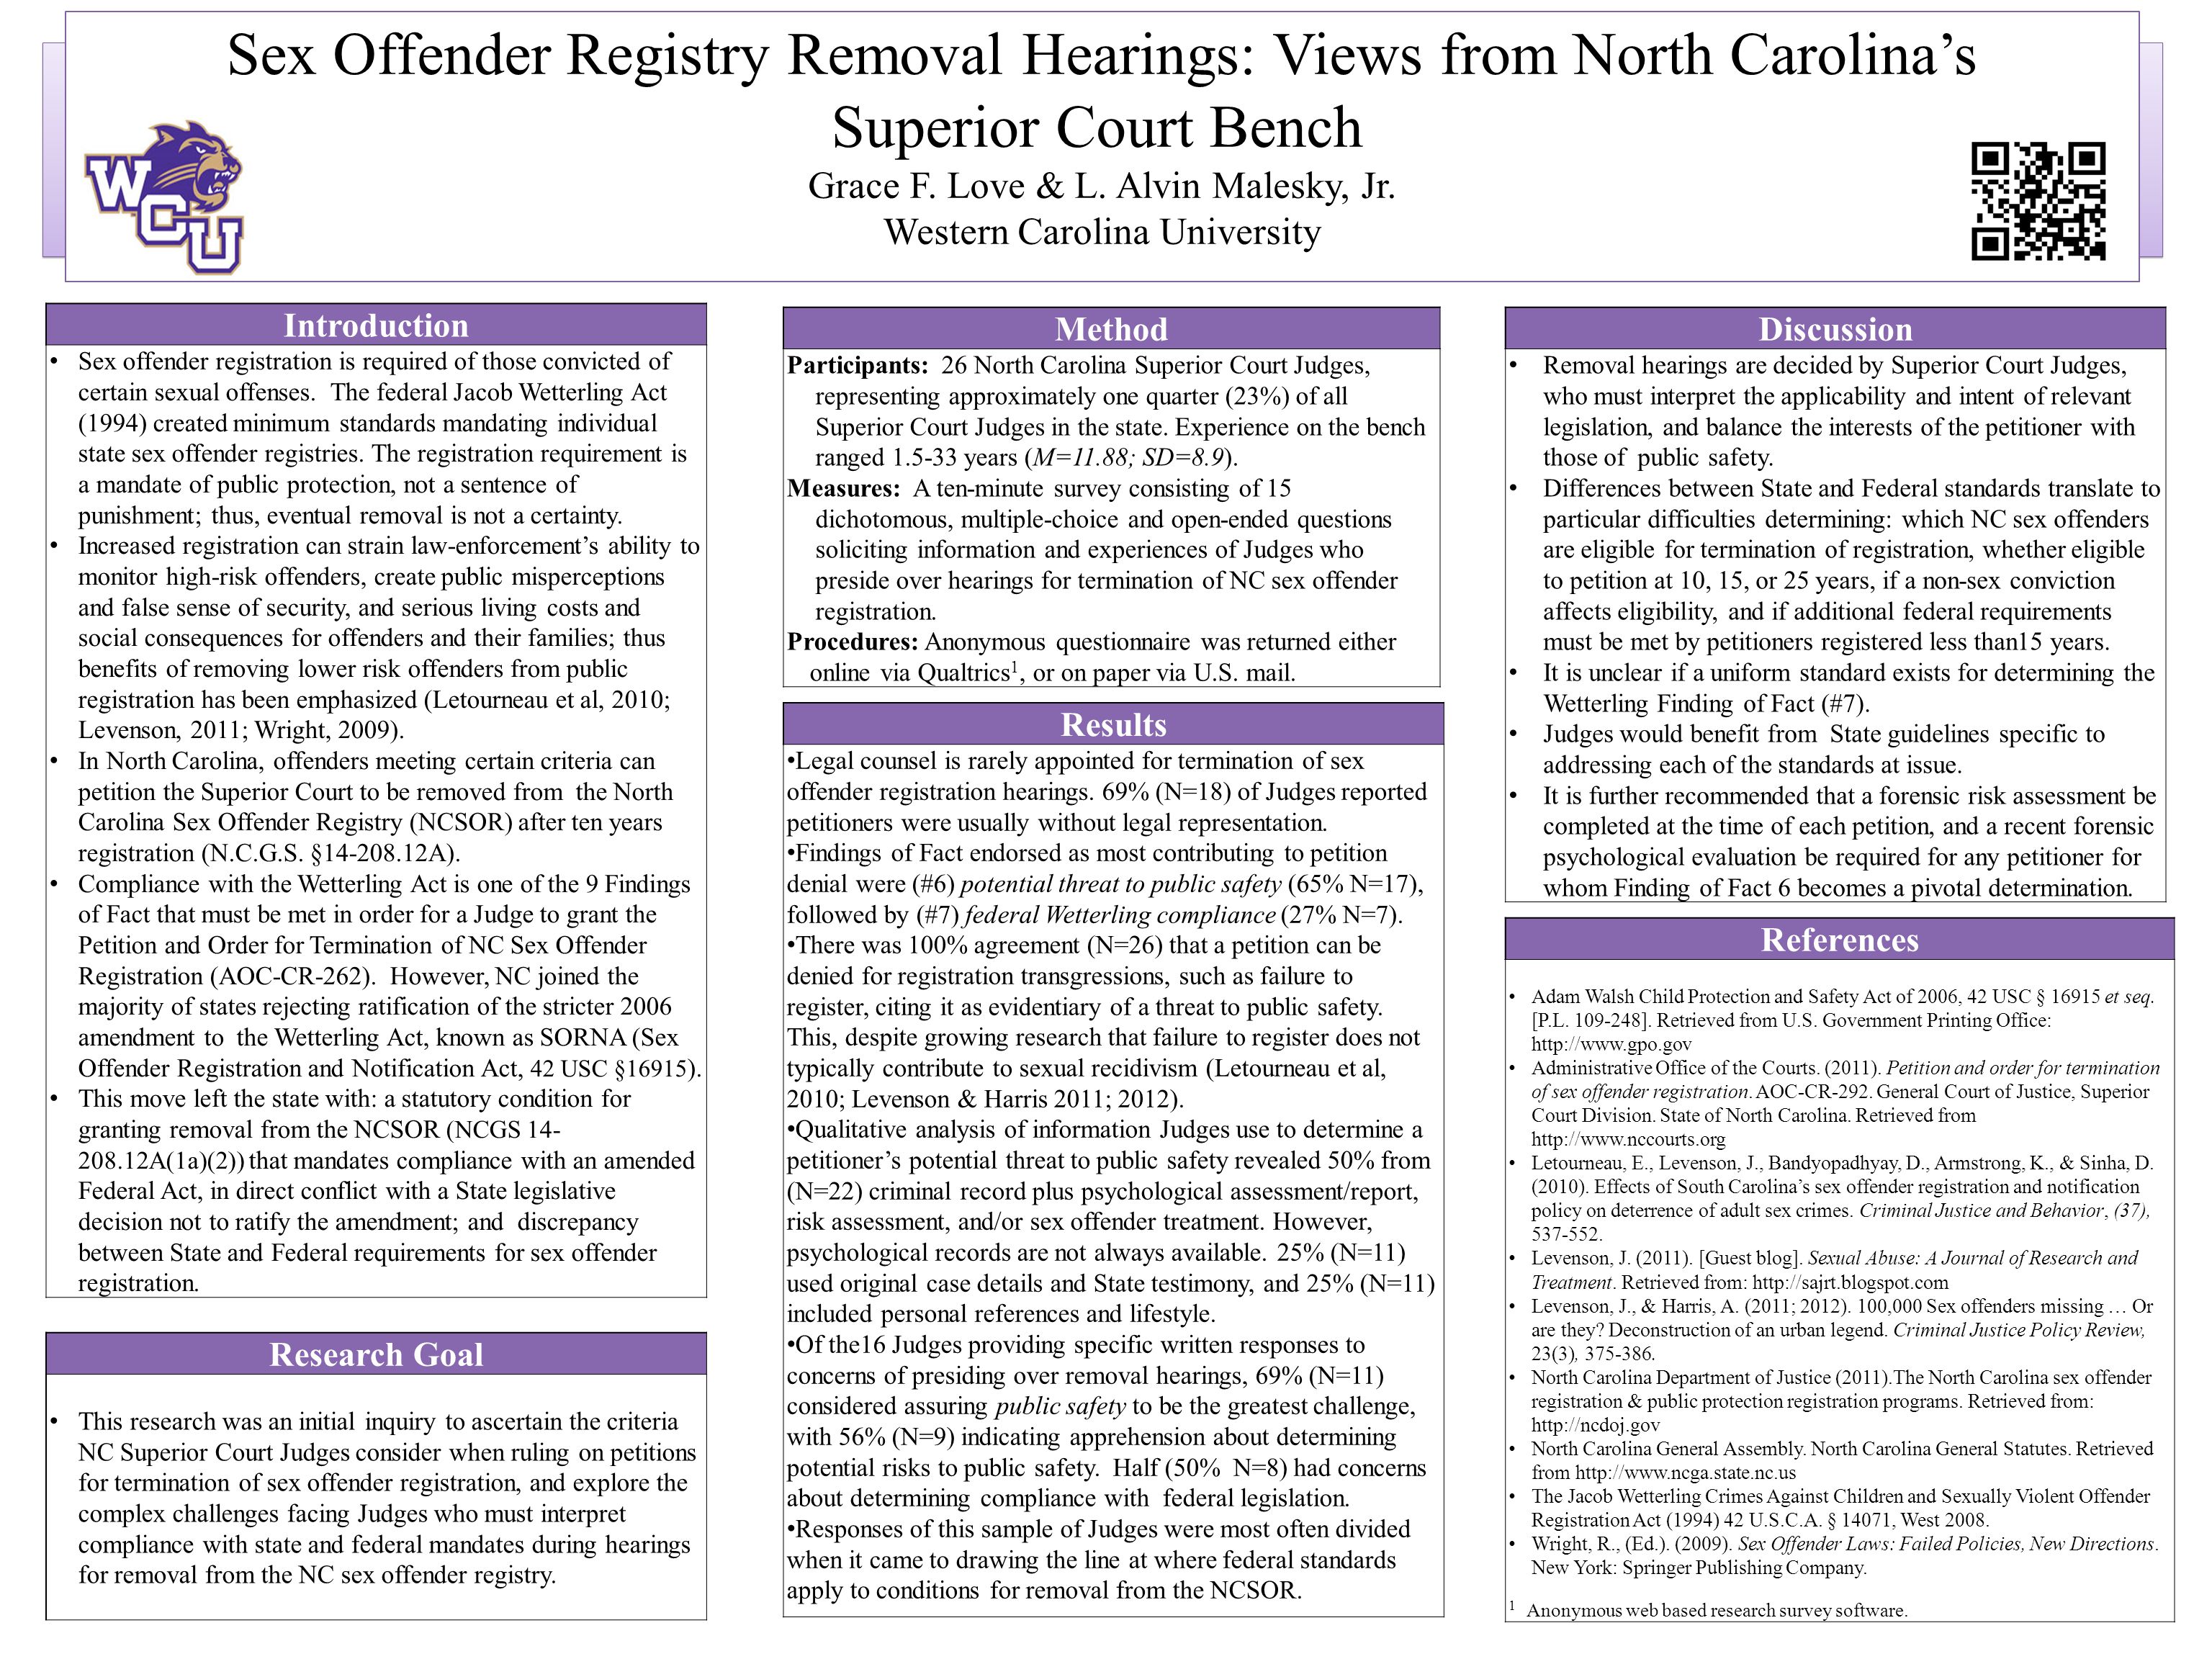 Sex Offender Registry Removal Hearings: Views from North Carolina’s Superior Court Bench Grace F.